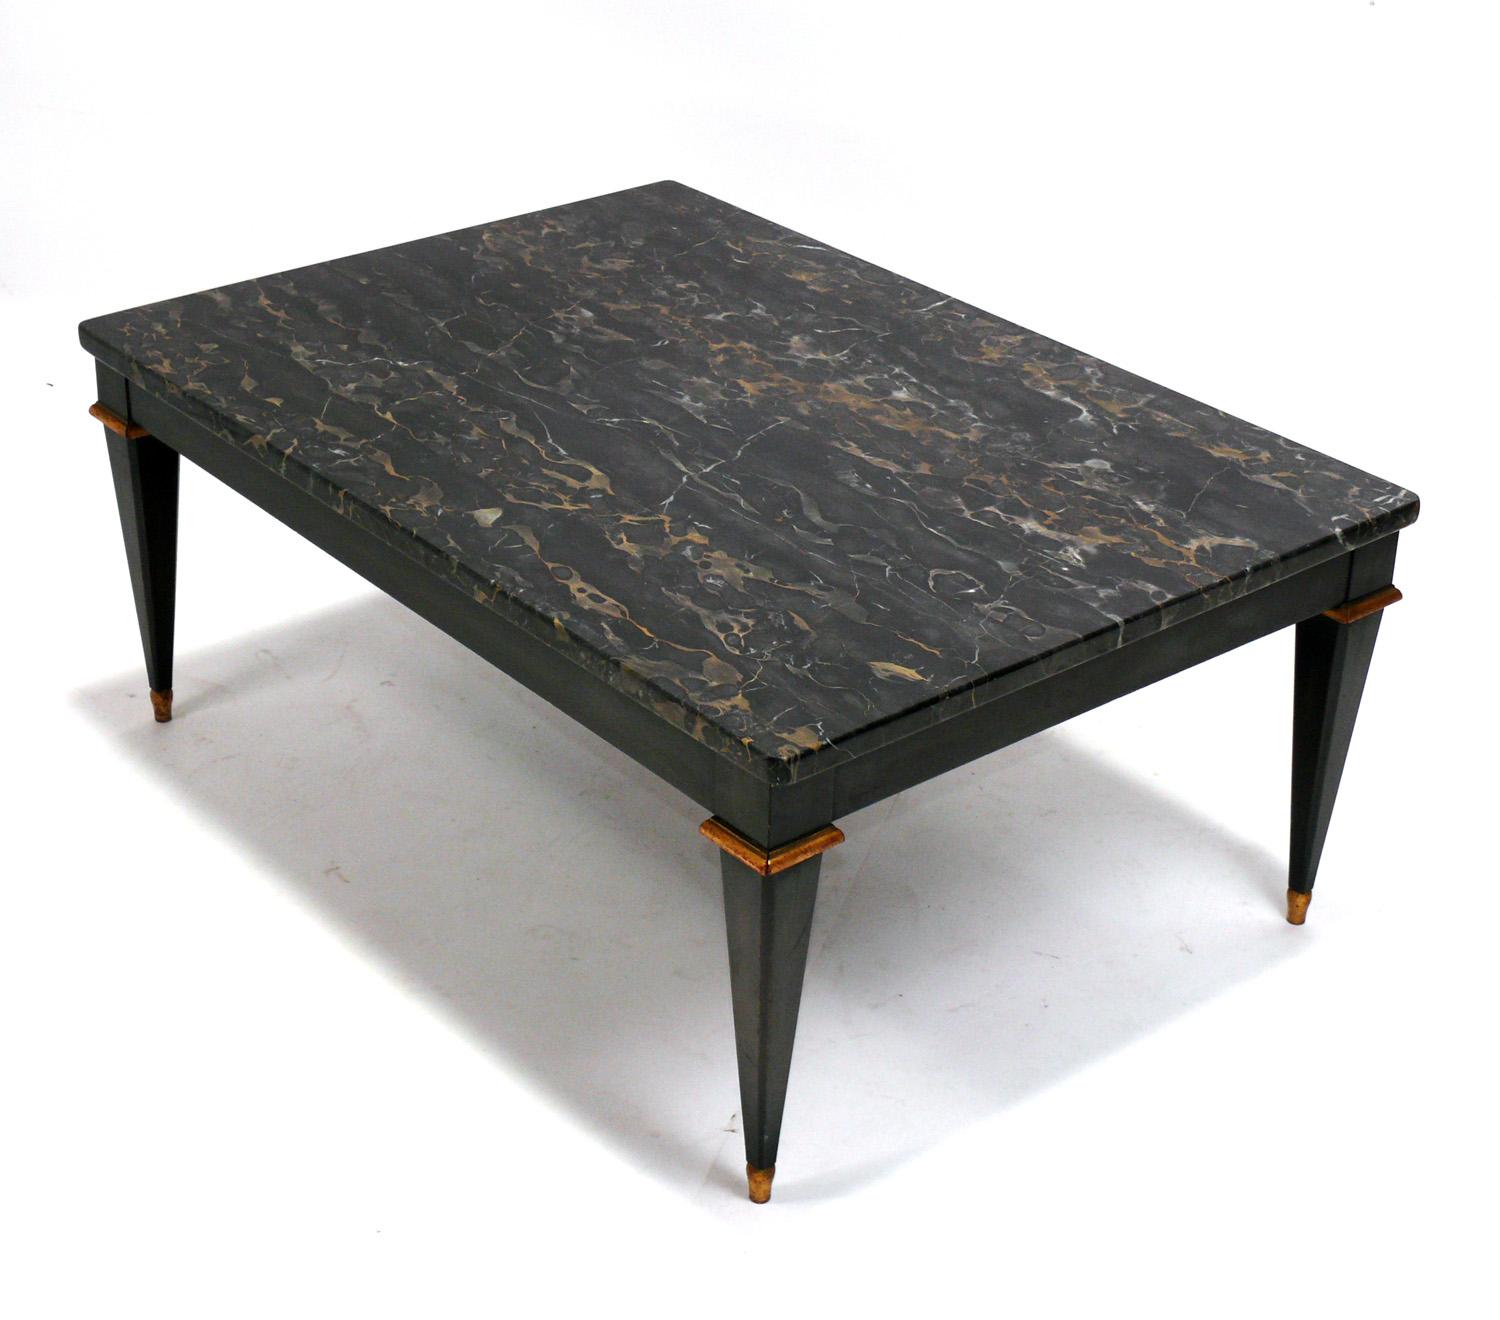 Elegant Black Marble Regency Style Coffee Table, by Baker Furniture, circa 1970s. Constructed of a beautiful piece of black marble with gold veining over a black lacquered and parcel gilt wood base. 